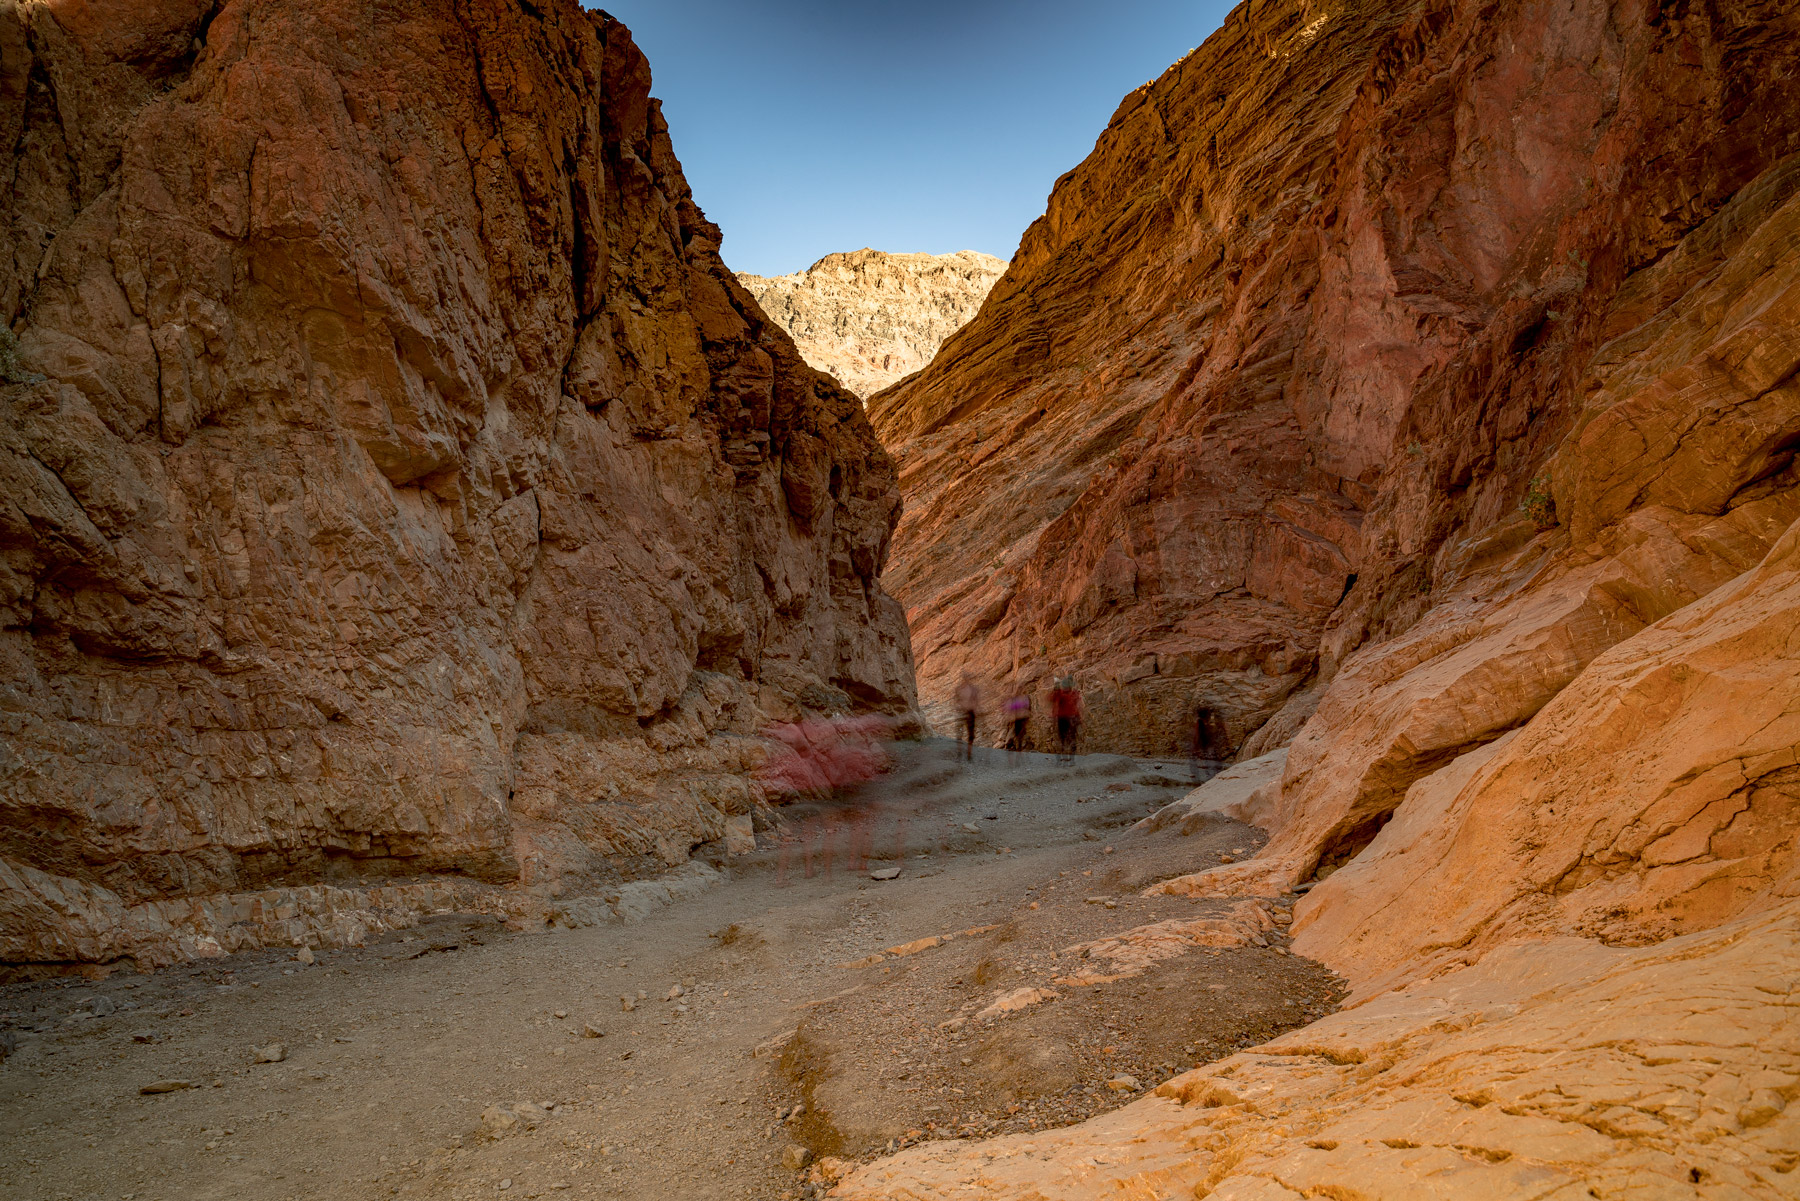 Mosiac Canyon in Death Valley National Park